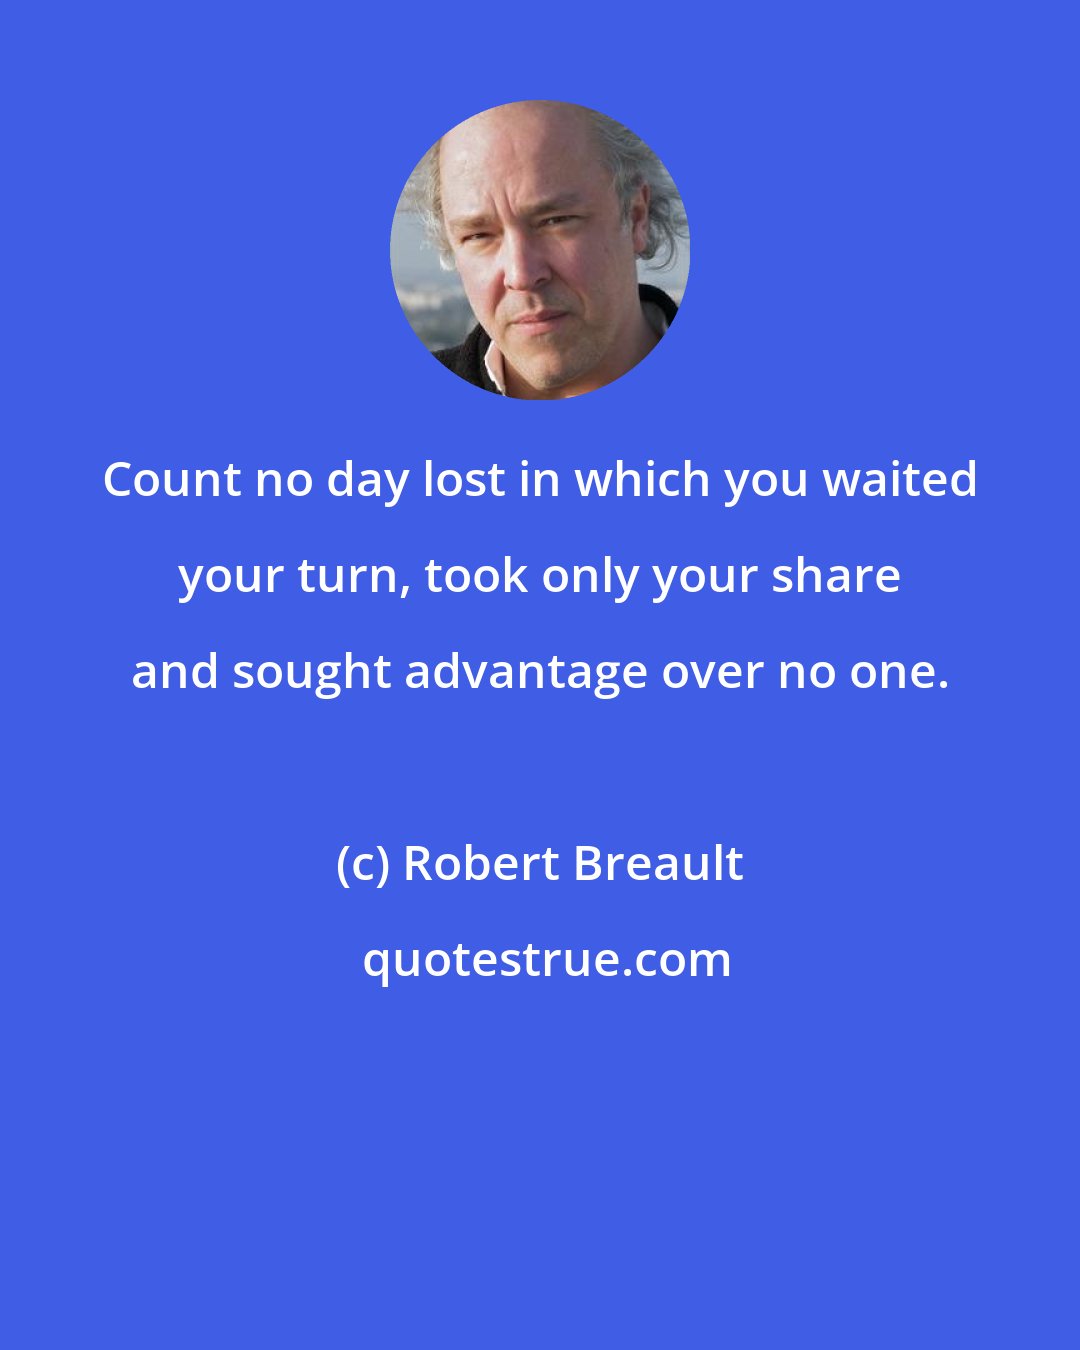 Robert Breault: Count no day lost in which you waited your turn, took only your share and sought advantage over no one.